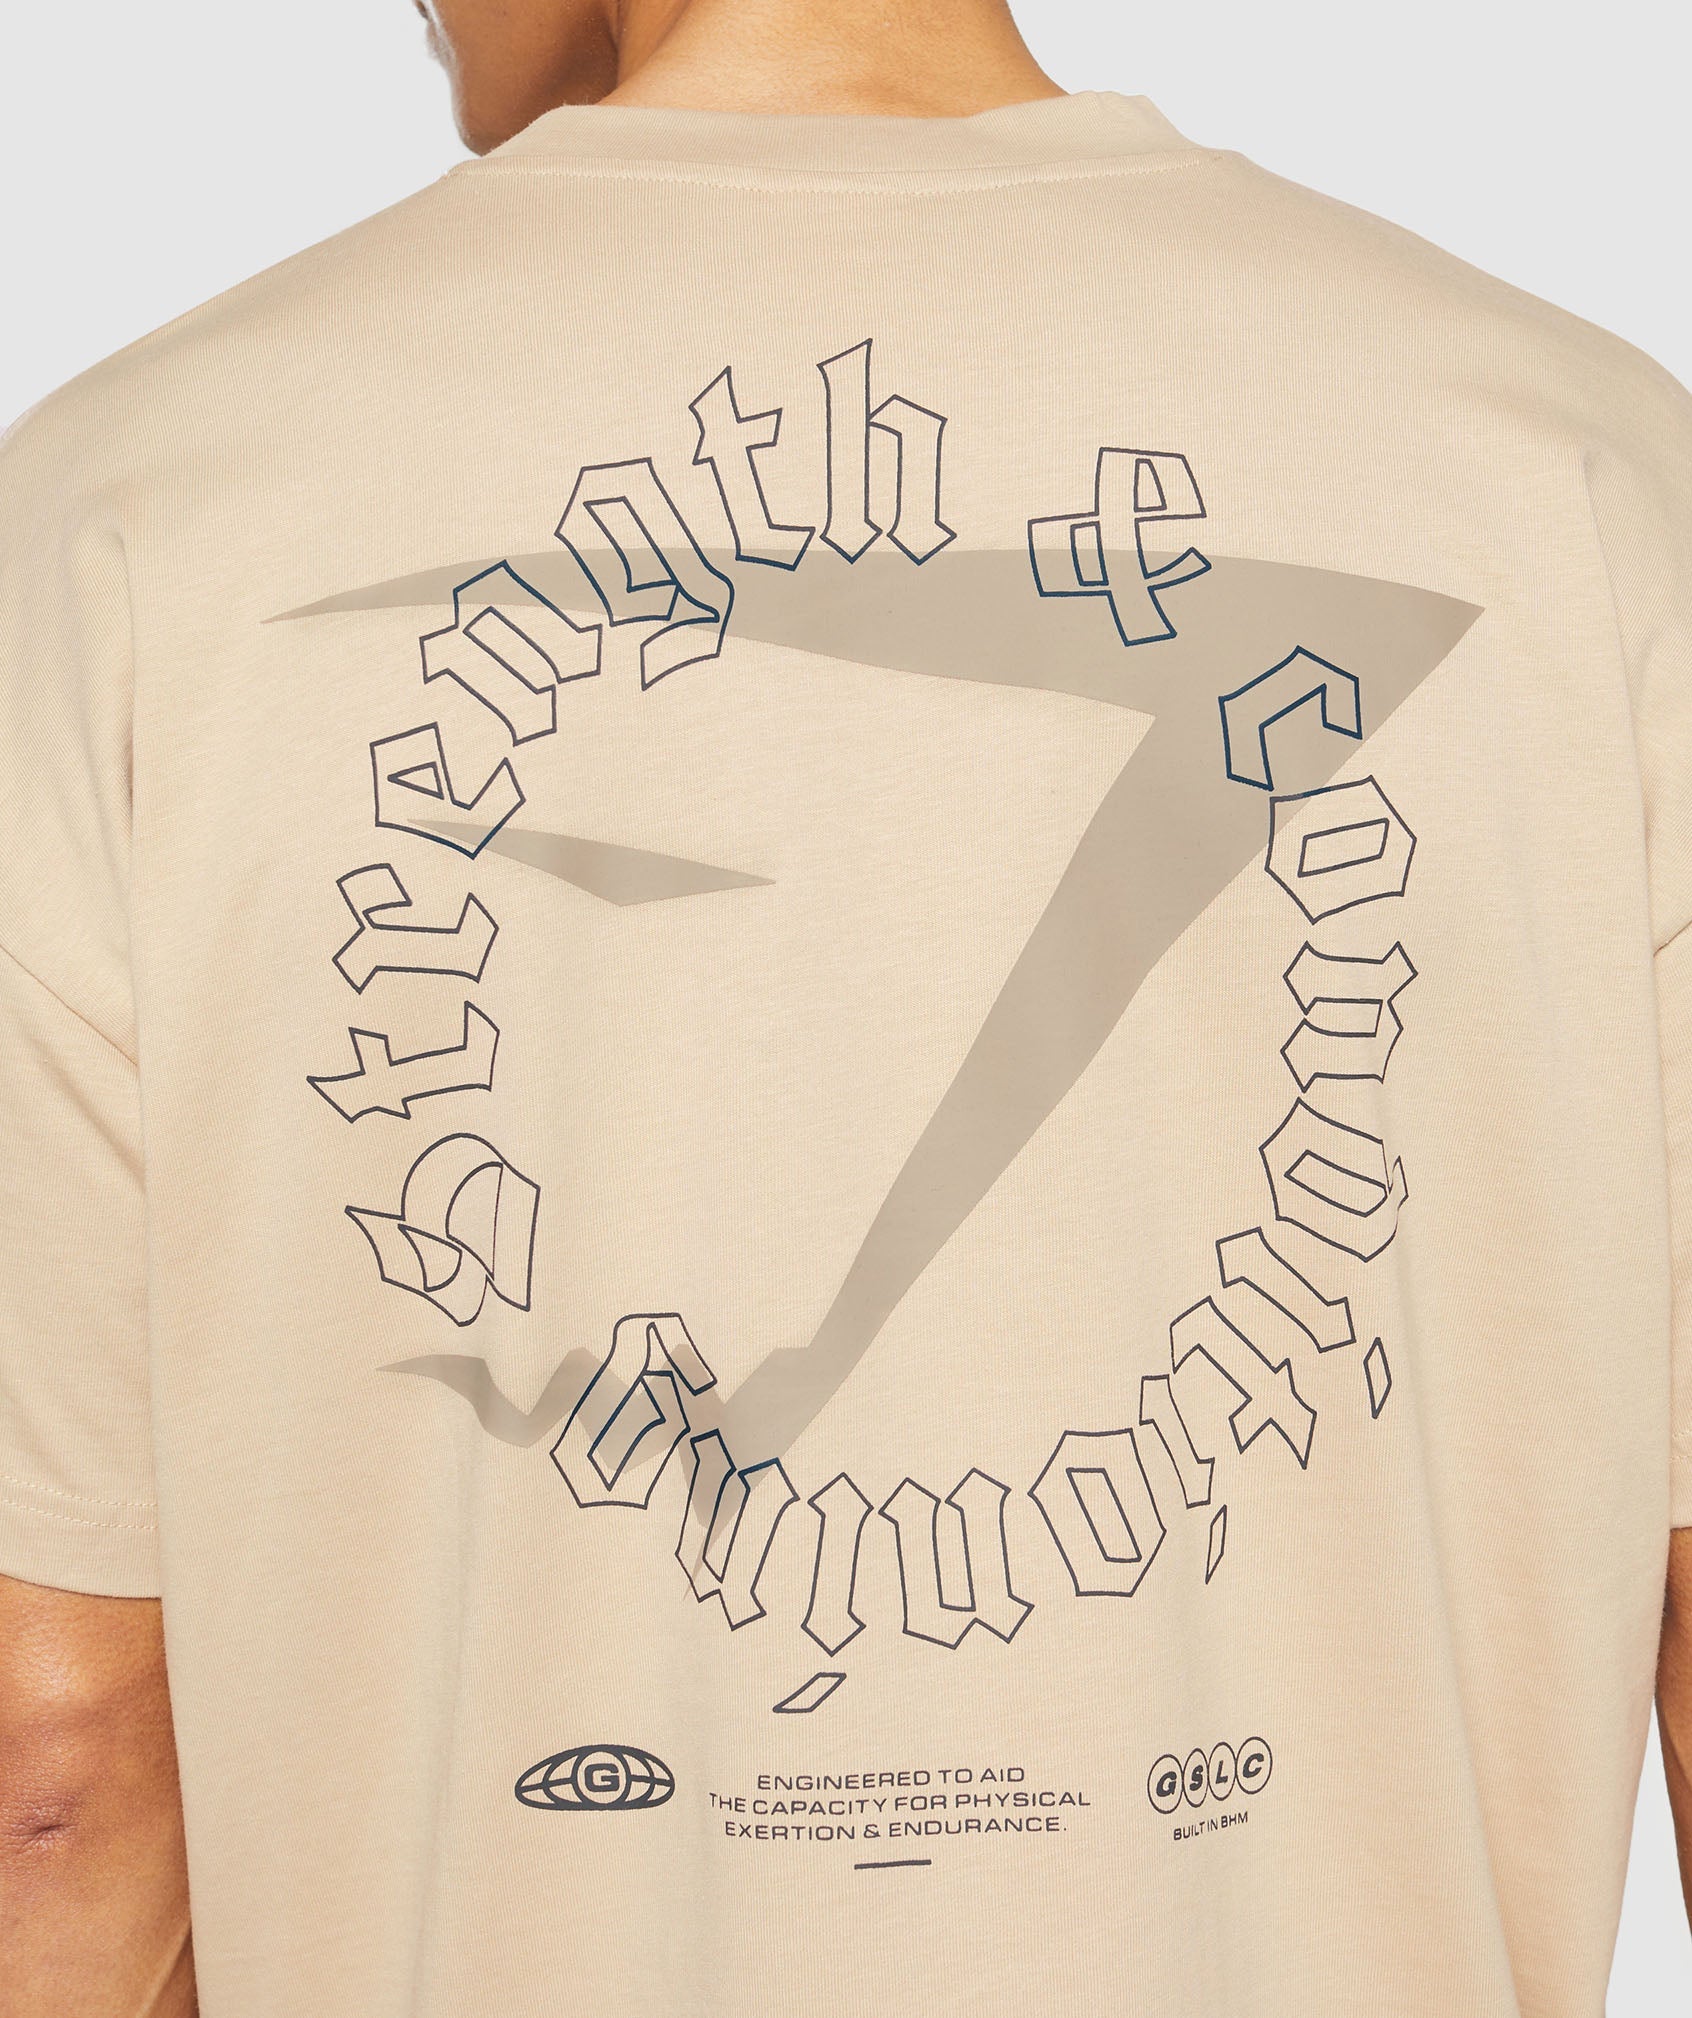 Strength and Conditioning T-Shirt in Vanilla Beige - view 5